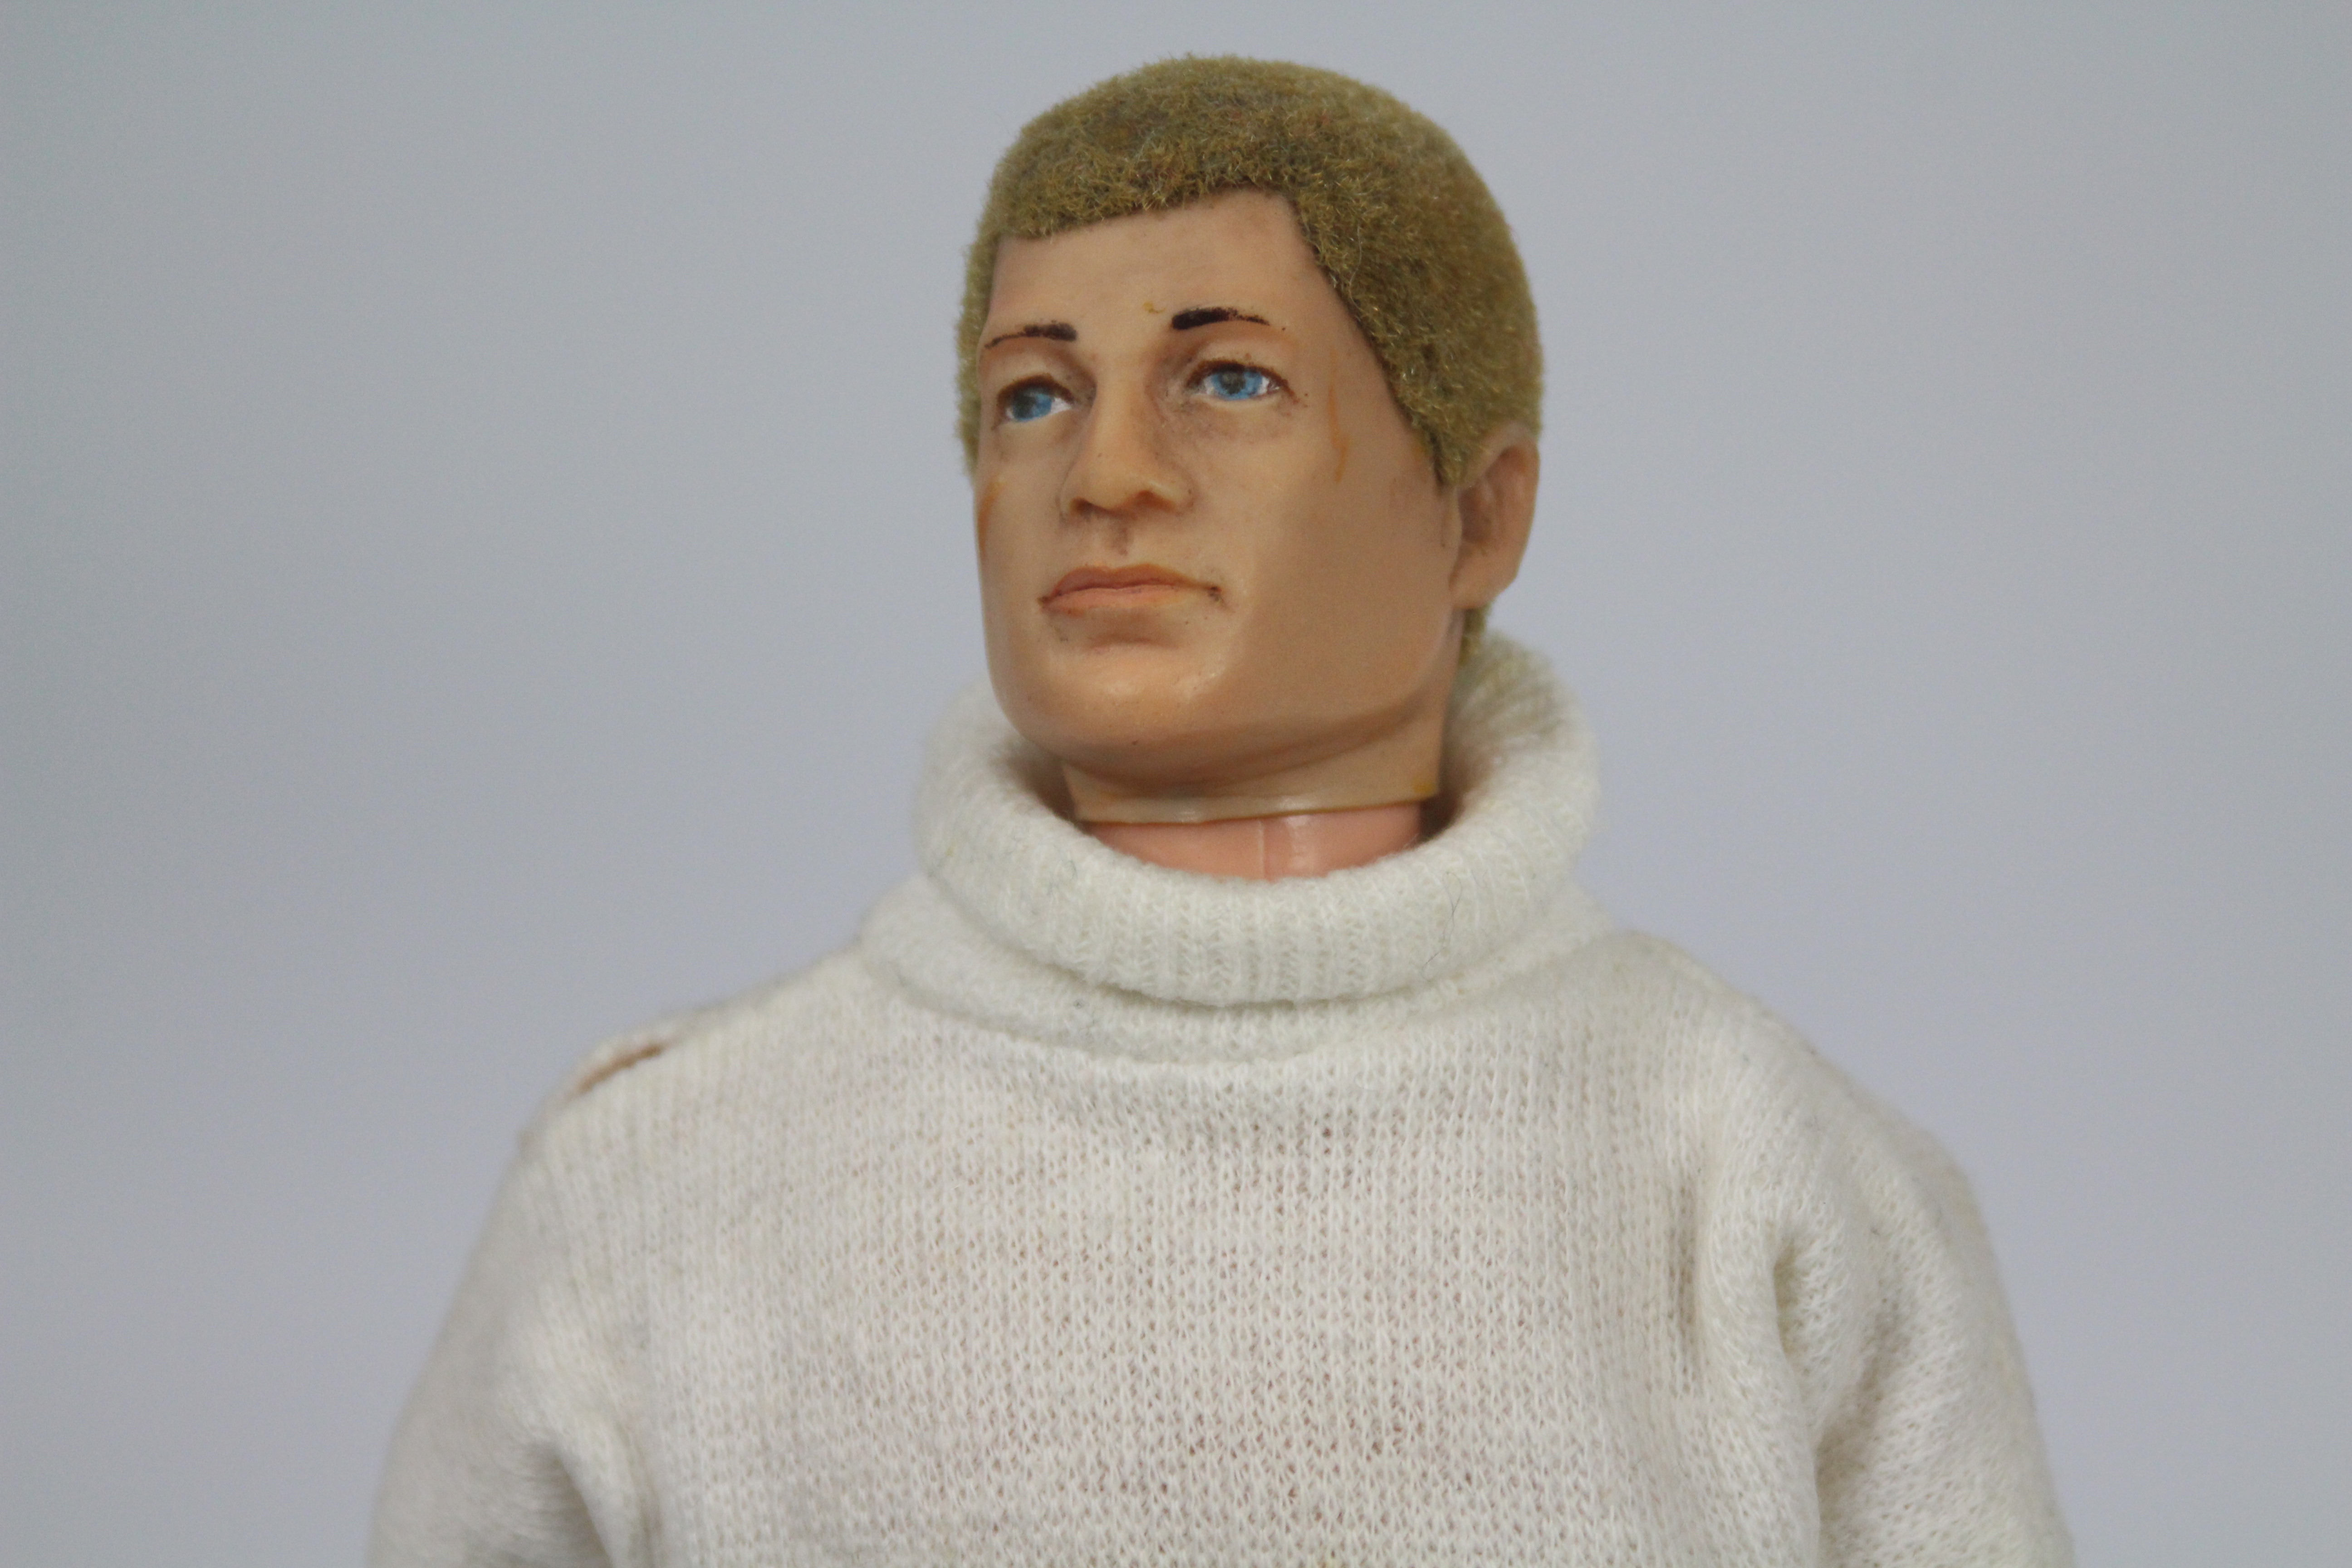 Palitoy, Action Man - A Palitoy Action Man figure in Adventurer outfit. - Image 2 of 4